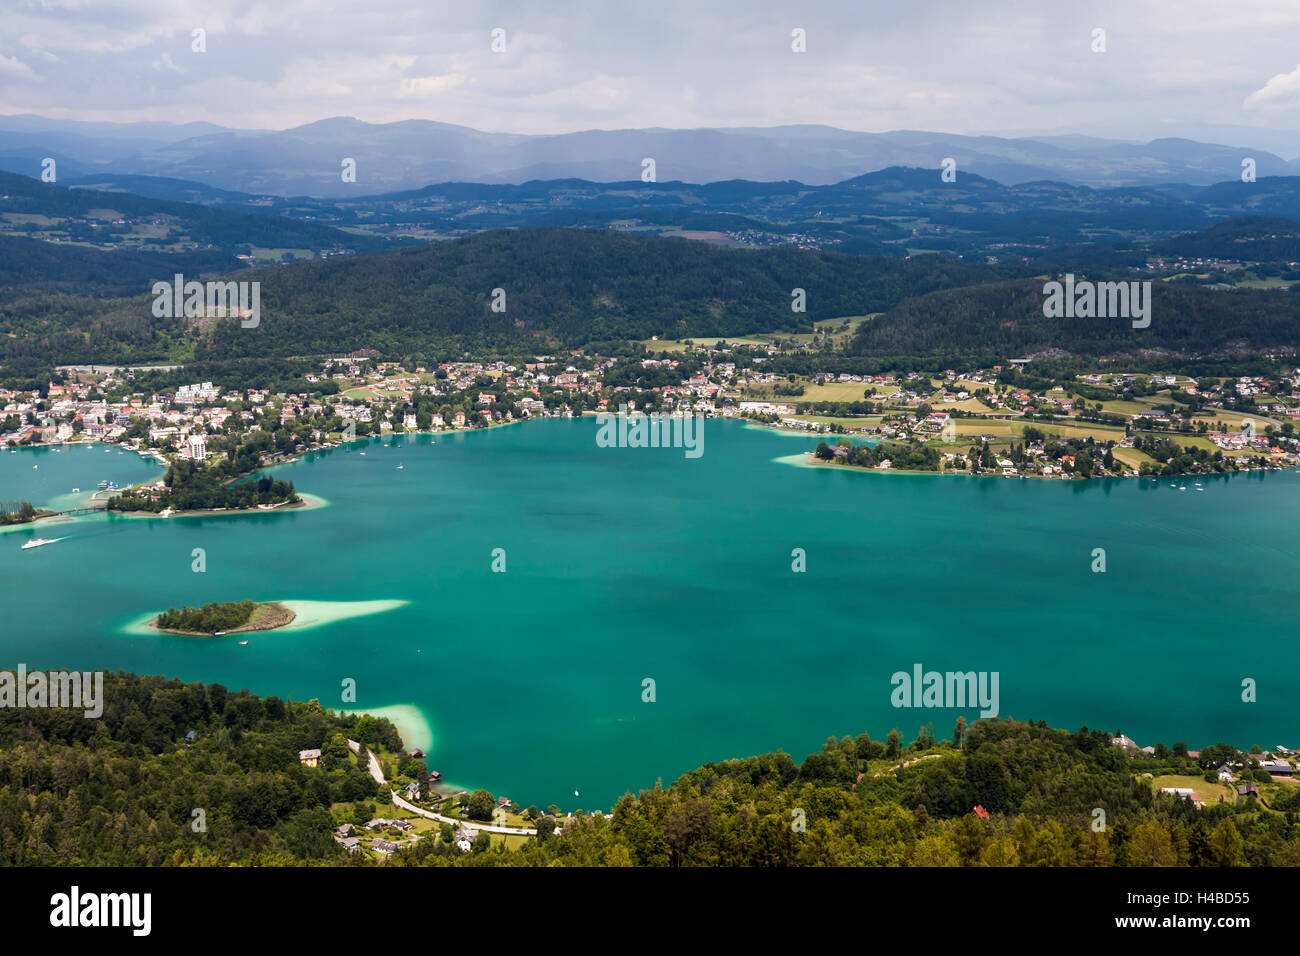 View from the observation tower Pyramidenkogel over the Wörthersee Stock Photo